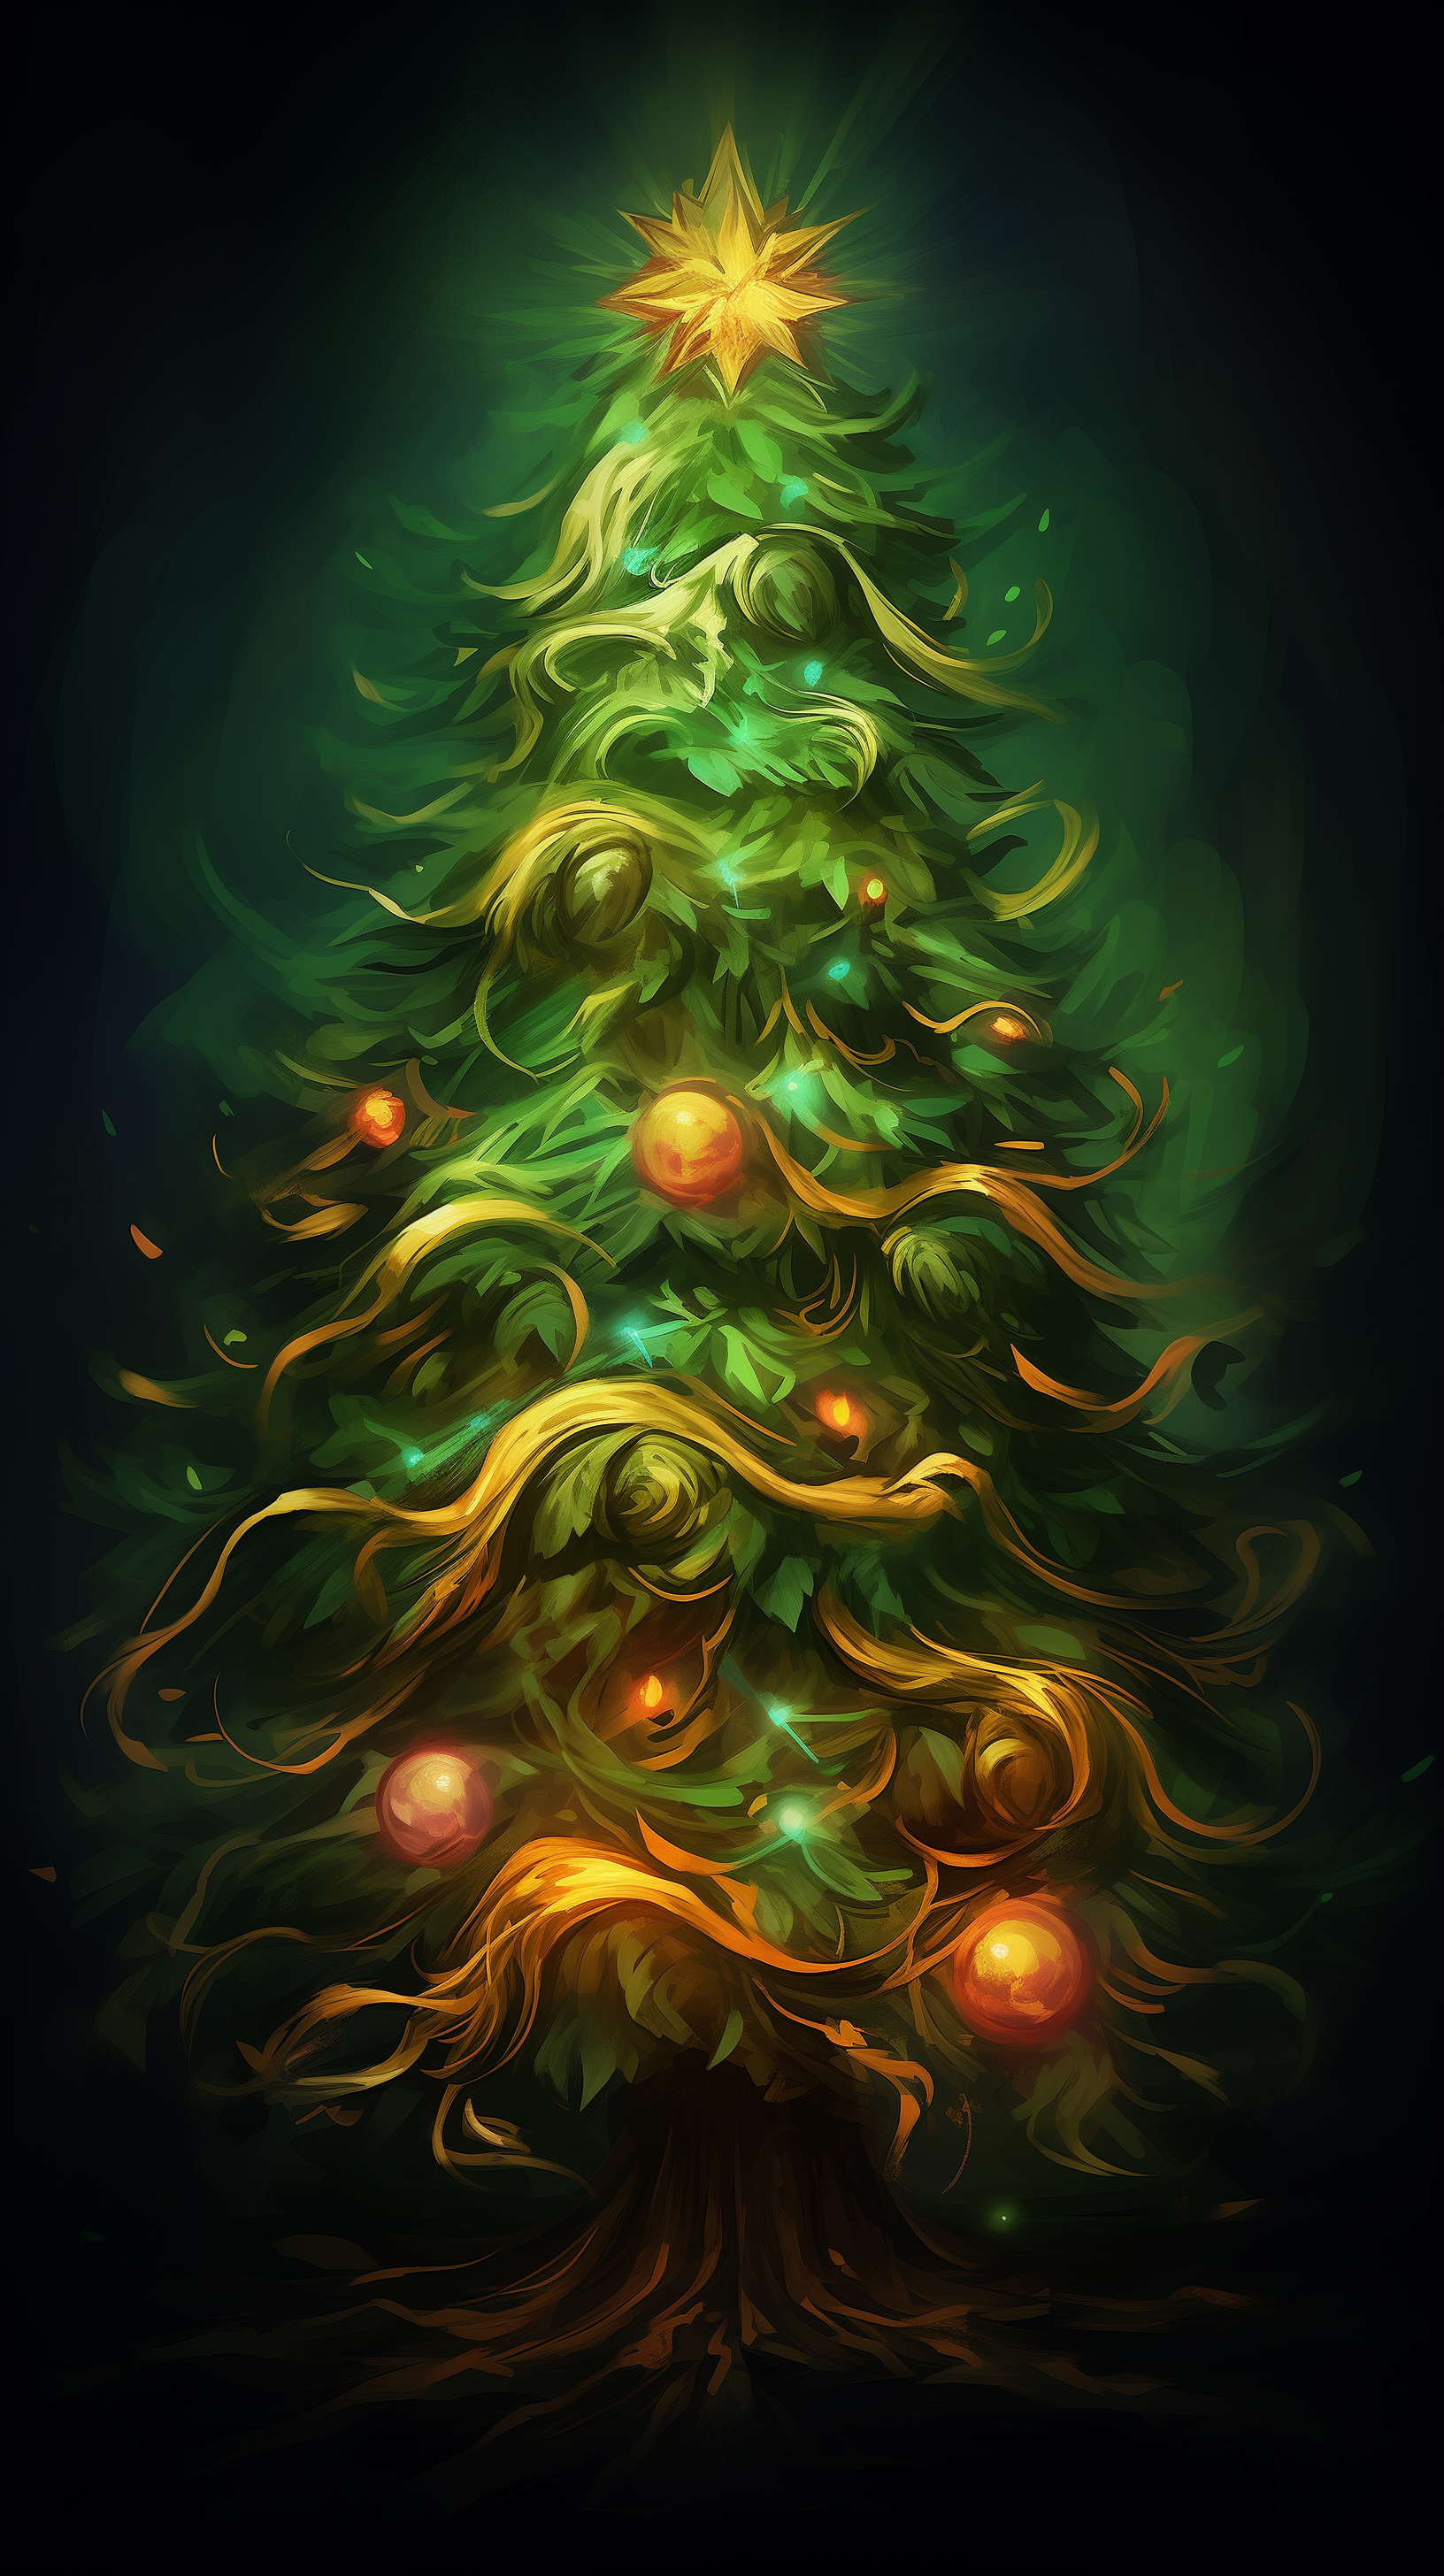 Artistic Christmas tree phone wallpaper with vibrant green hues and warm glowing lights, perfect for holiday season.